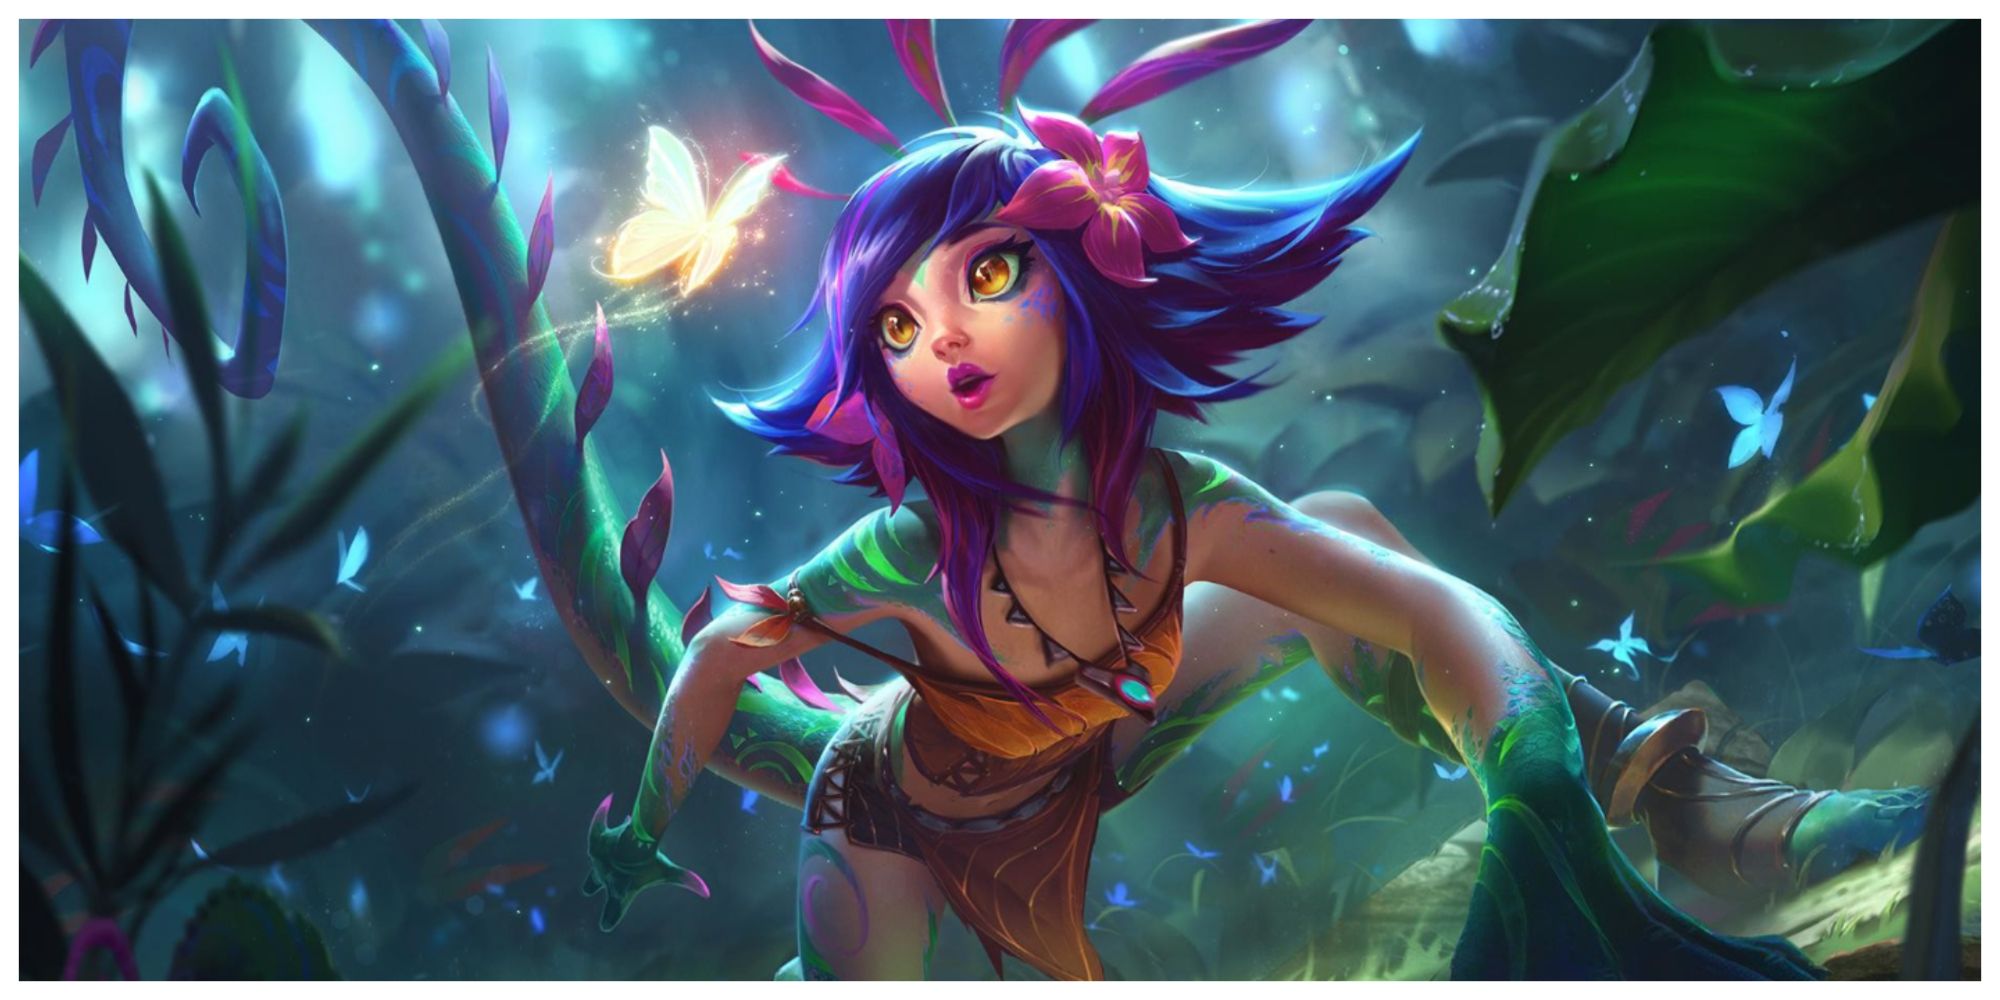 Neeko, The Curious Chameleon in the jungles of Ixtal, her gaze filled with wonderment and awe as she beholds a butterfly 